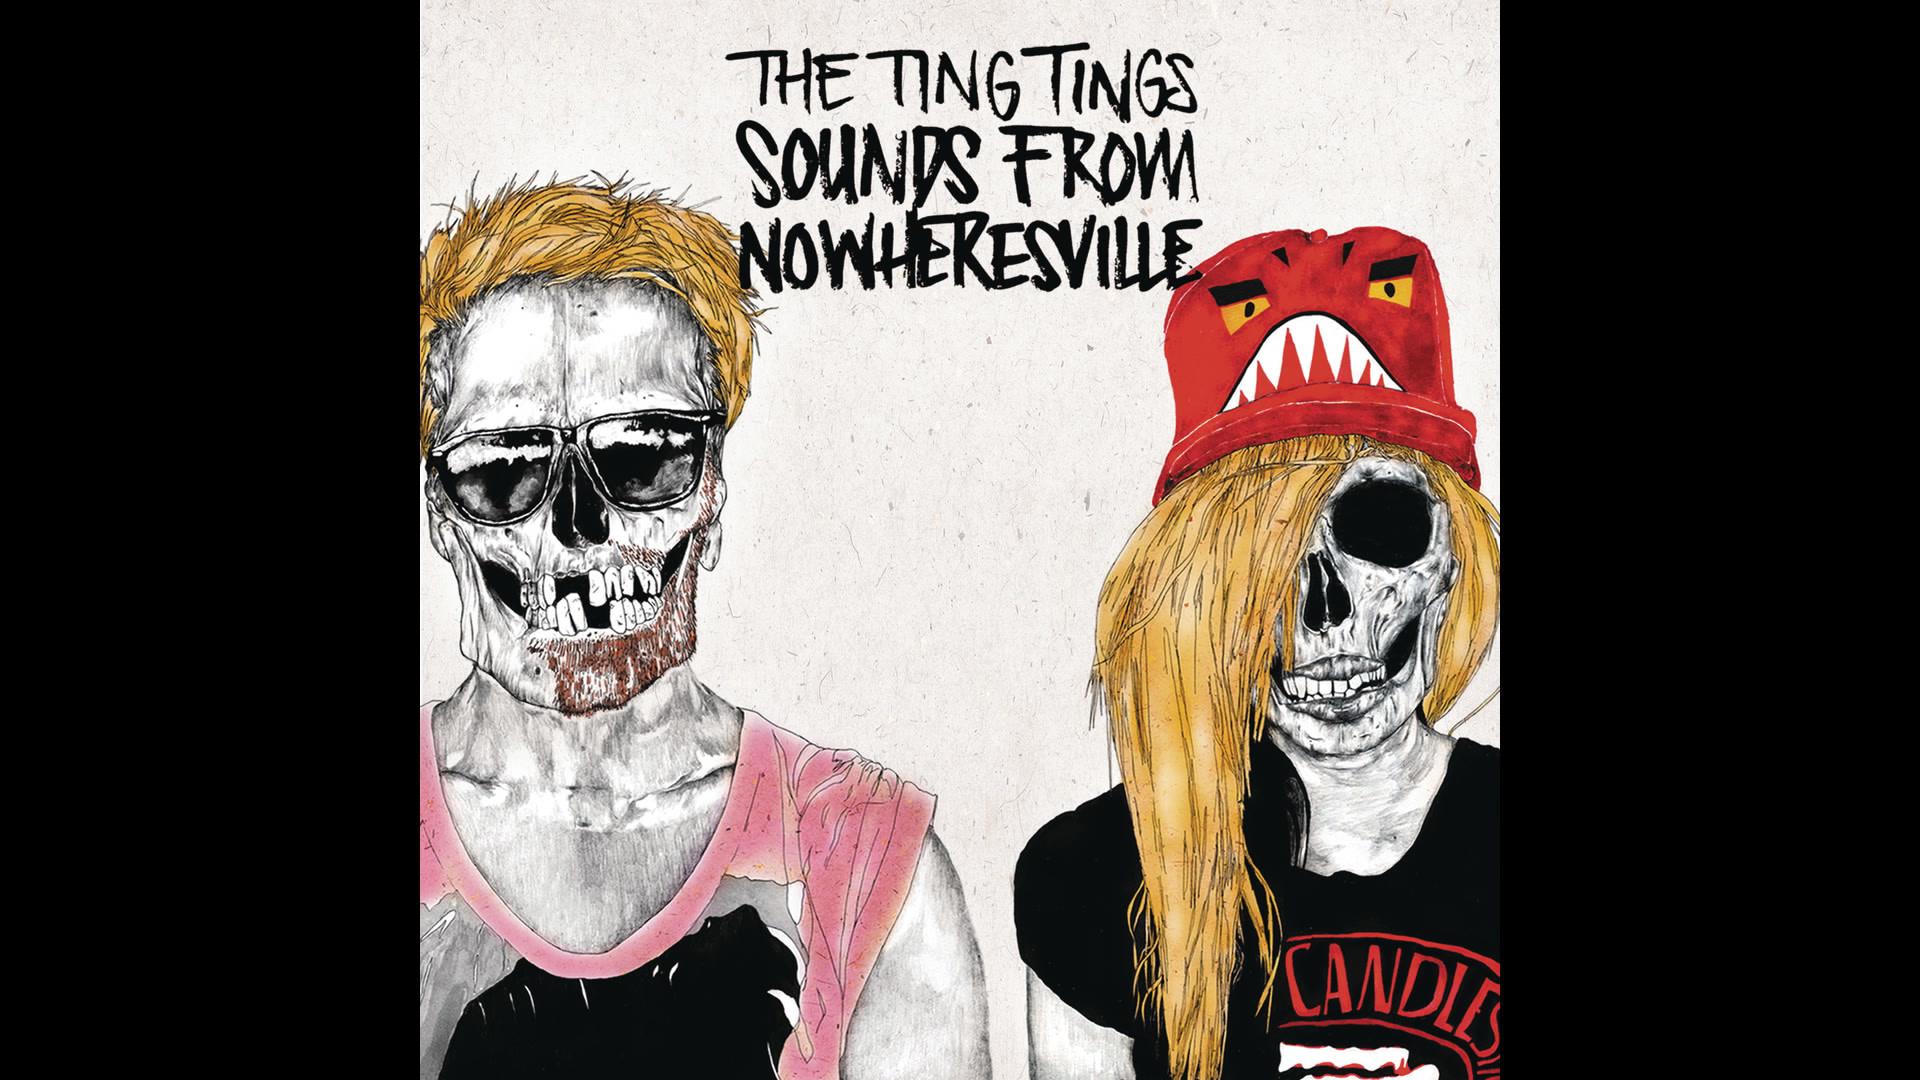 The Ting Tings - We're Not the Same (Audio)